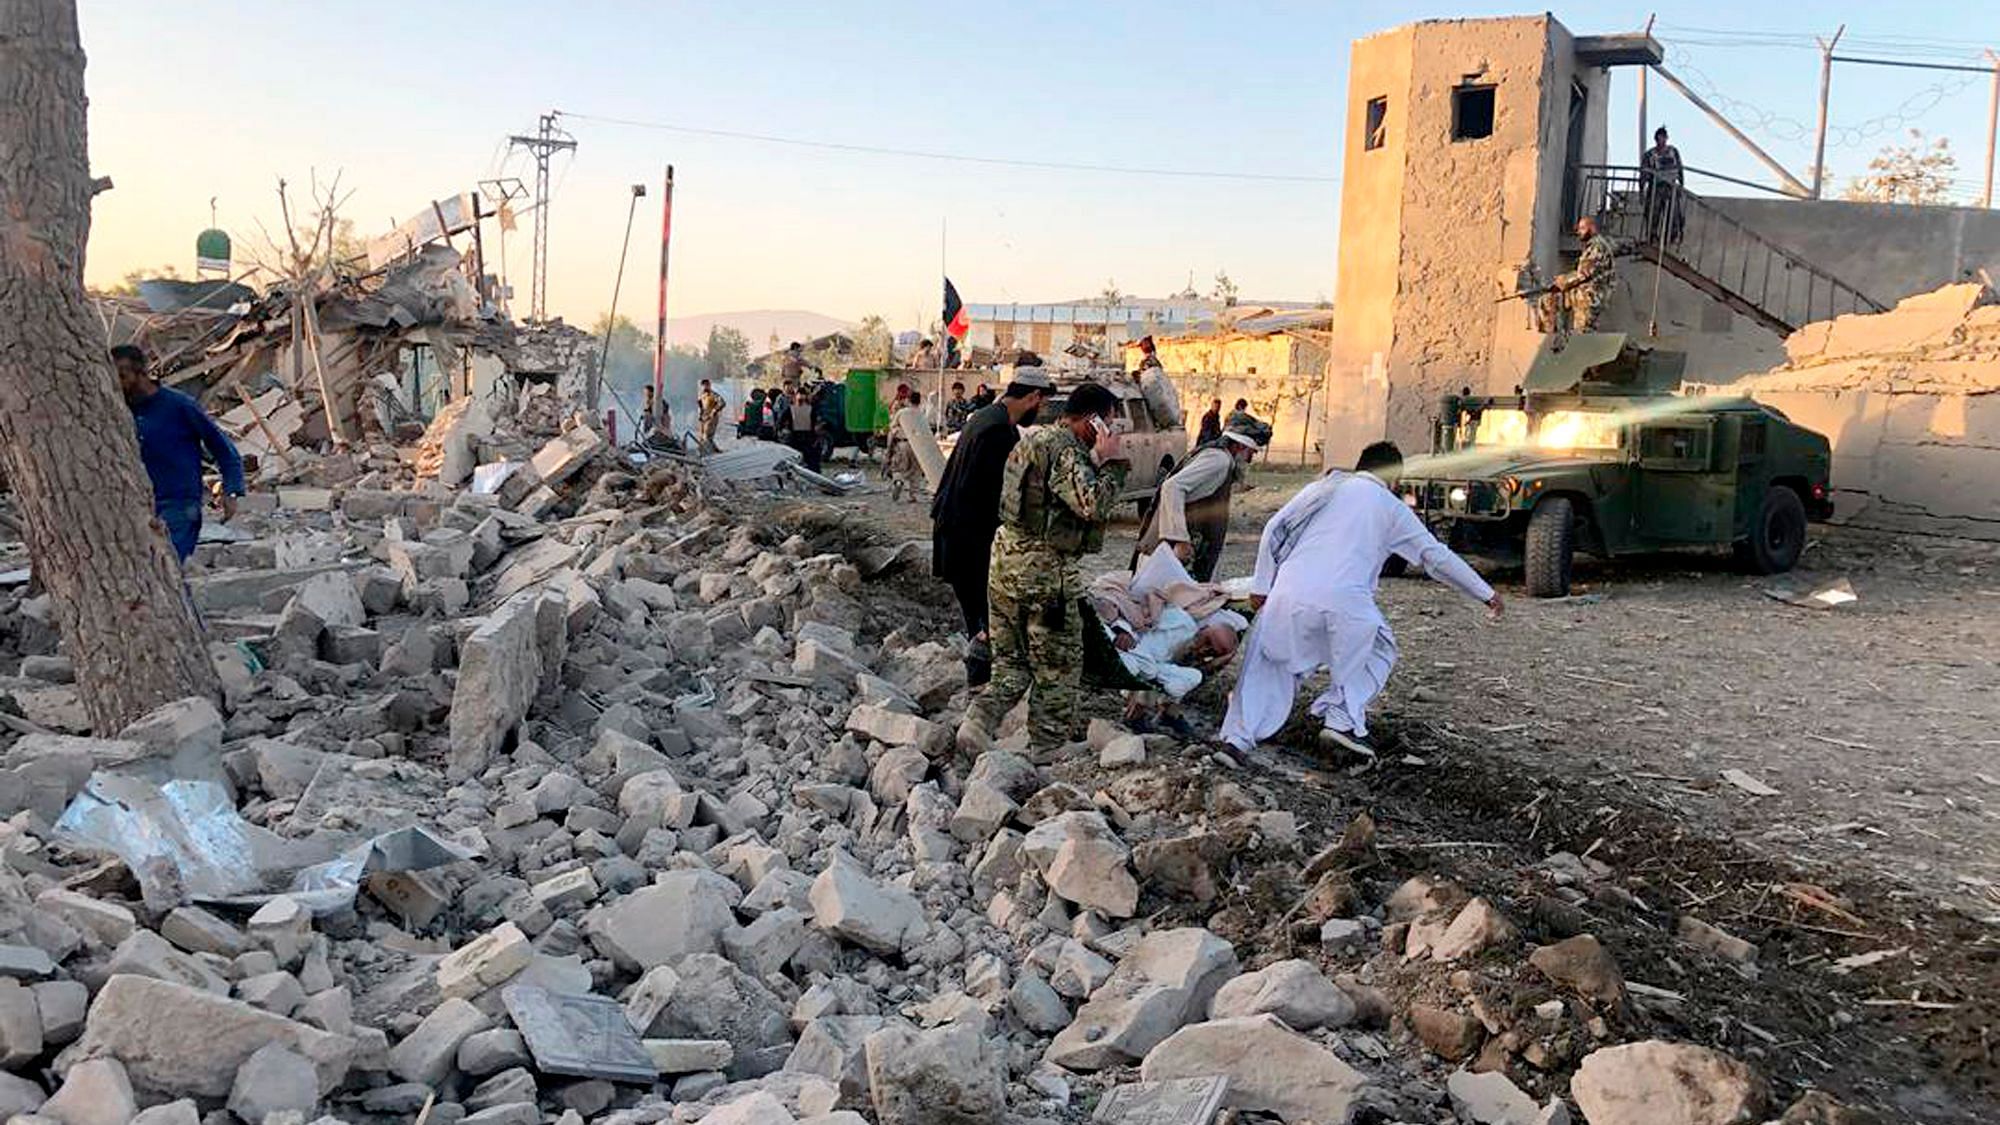 Afghan security members and people work at the site of a suicide attack in Zabul, Afghanistan.